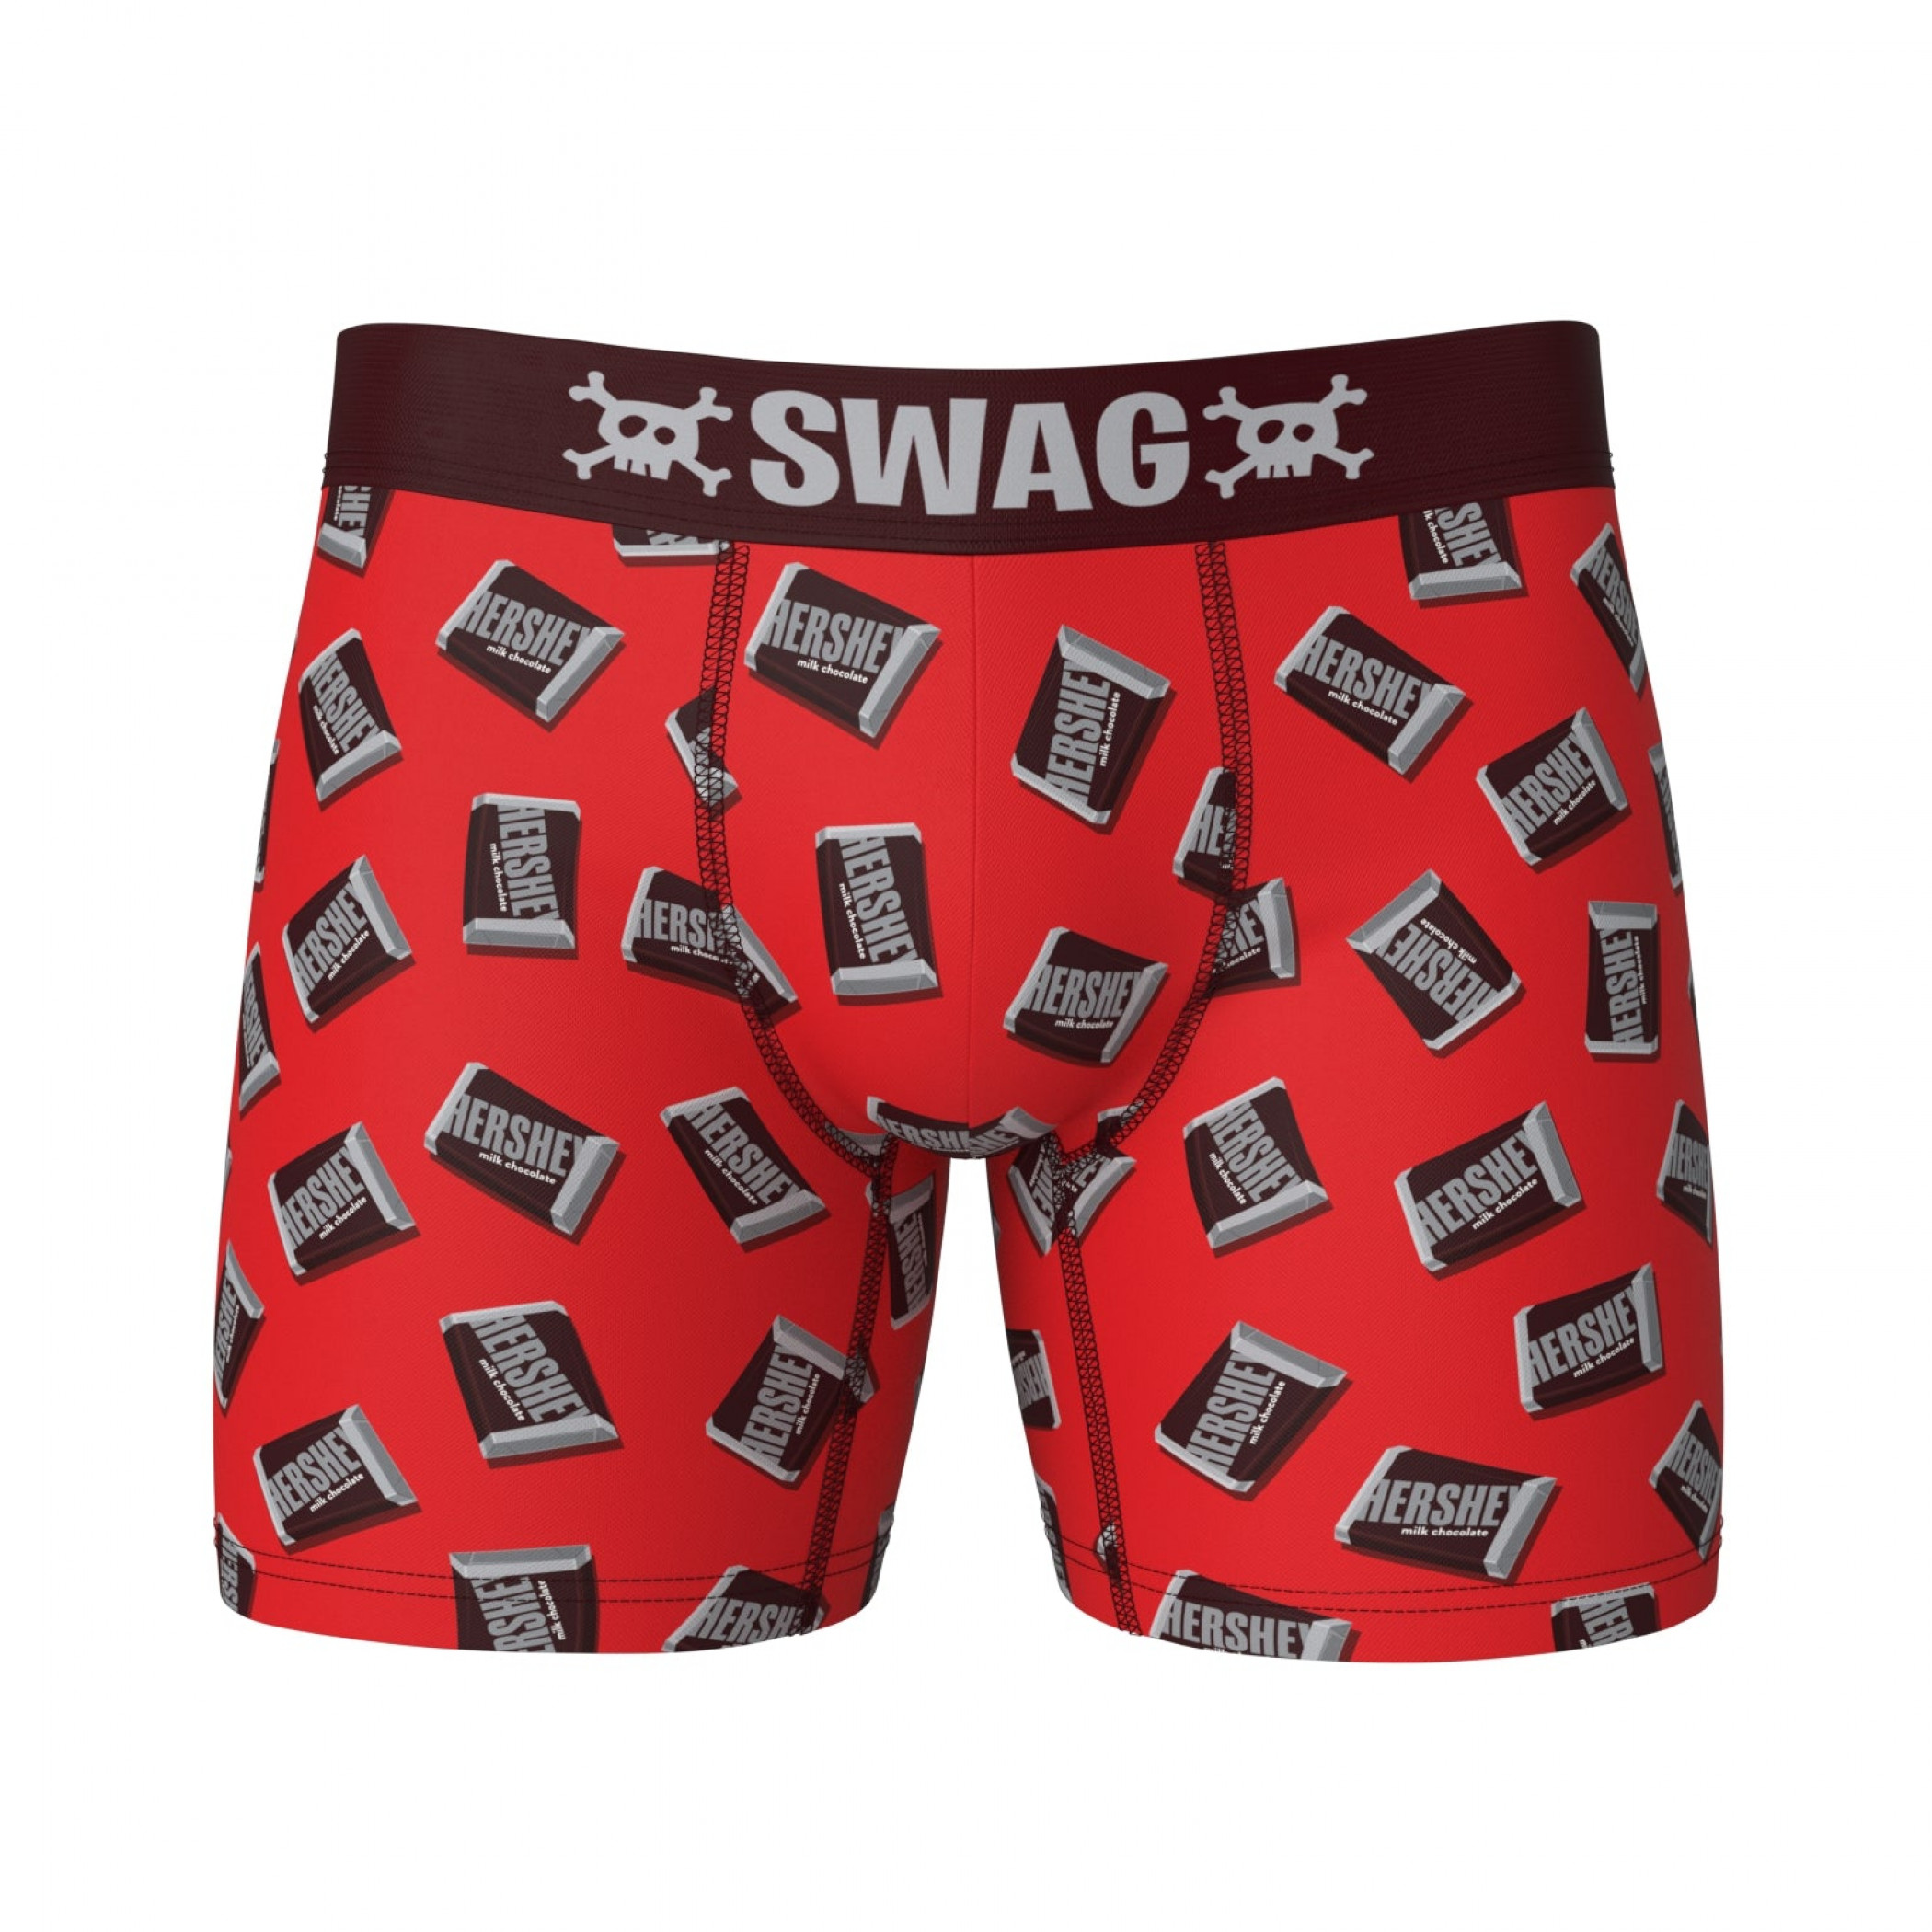 Hershey's Chocolate SWAG Boxer Briefs with Novelty Packaging